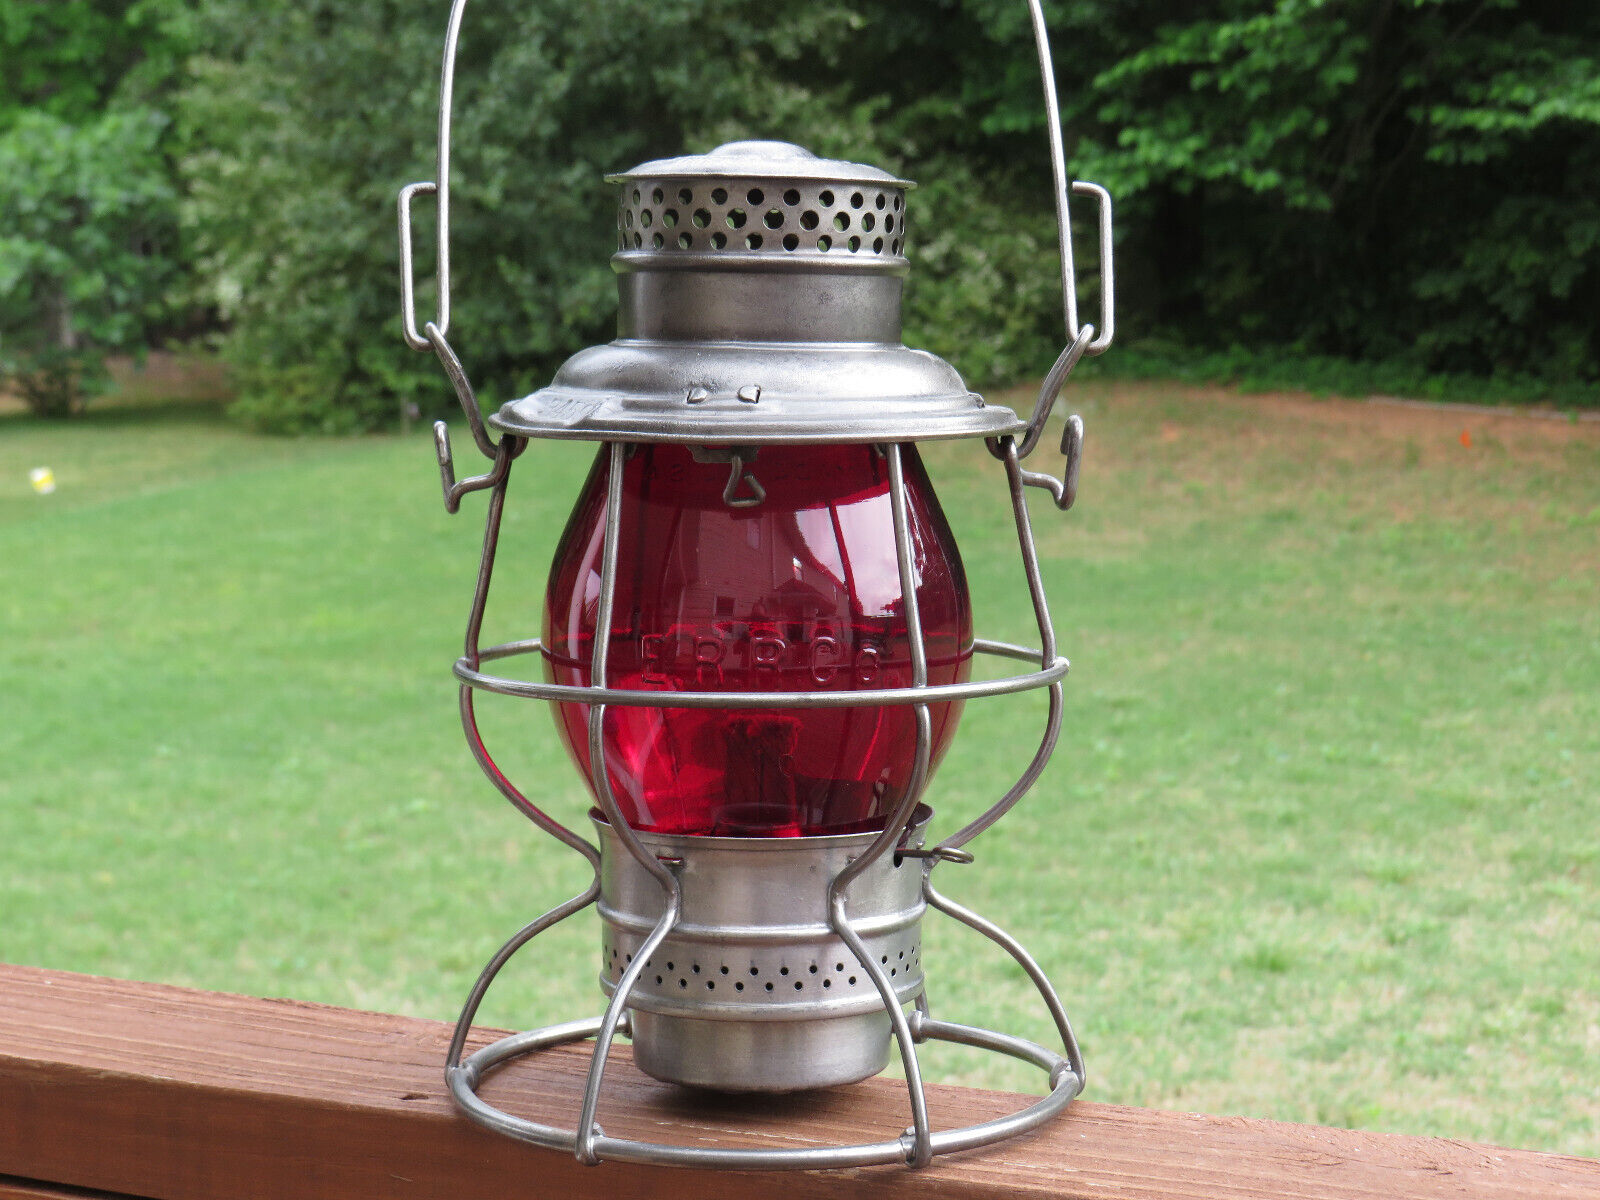 ERIE E.R.R. Co. ADLAKE RELIABLE RAILROAD LANTERN with RED CAST GLOBE VERY NICE